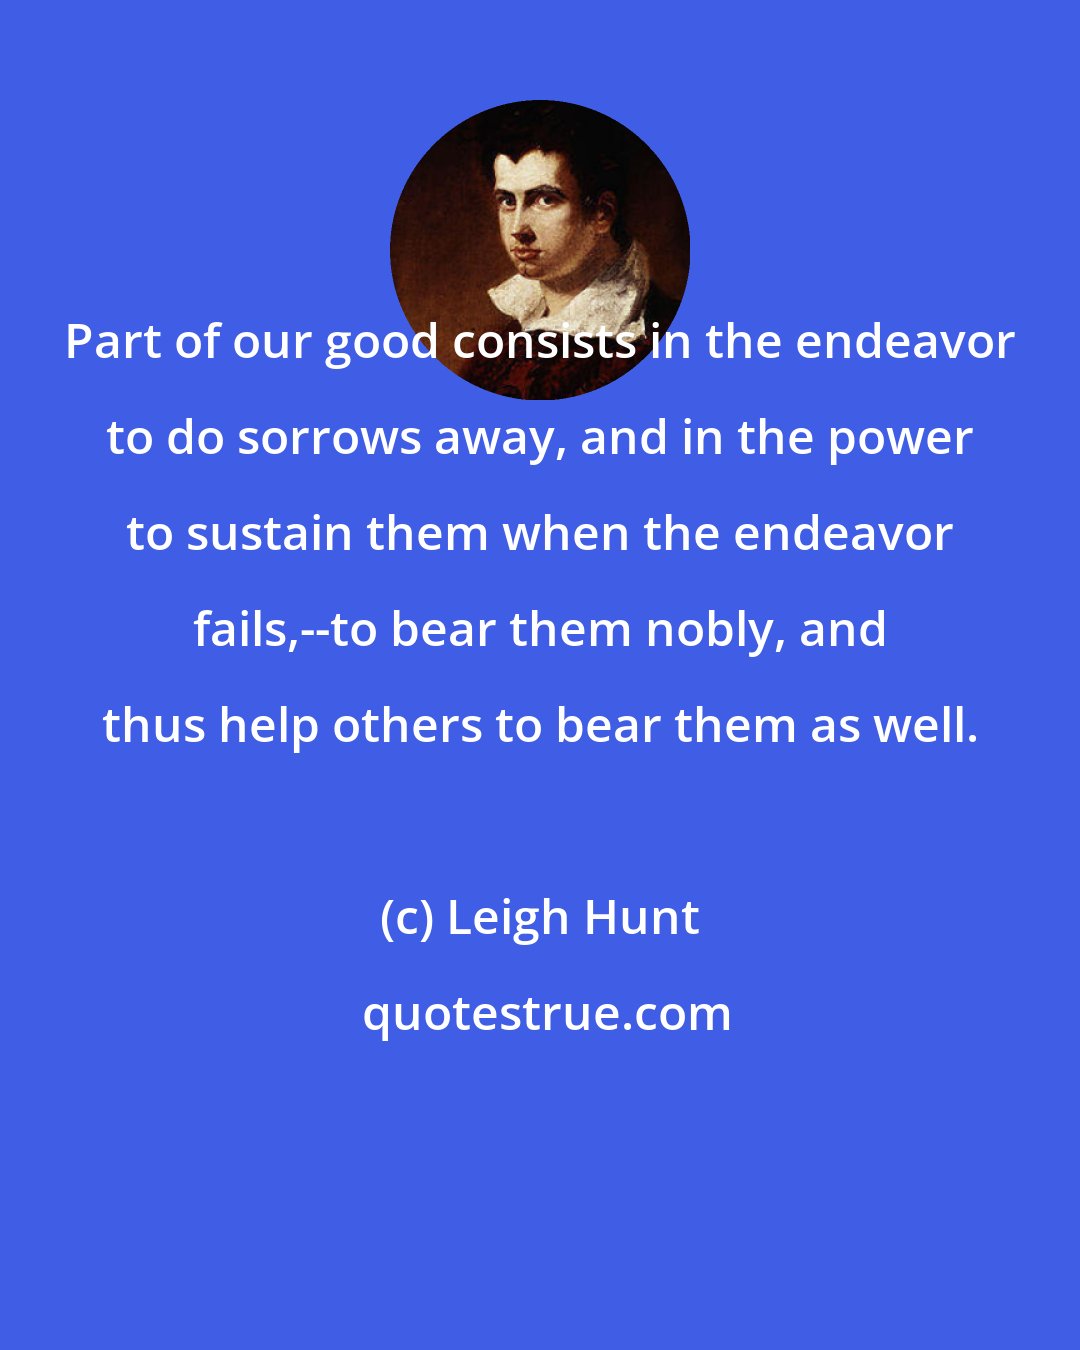 Leigh Hunt: Part of our good consists in the endeavor to do sorrows away, and in the power to sustain them when the endeavor fails,--to bear them nobly, and thus help others to bear them as well.